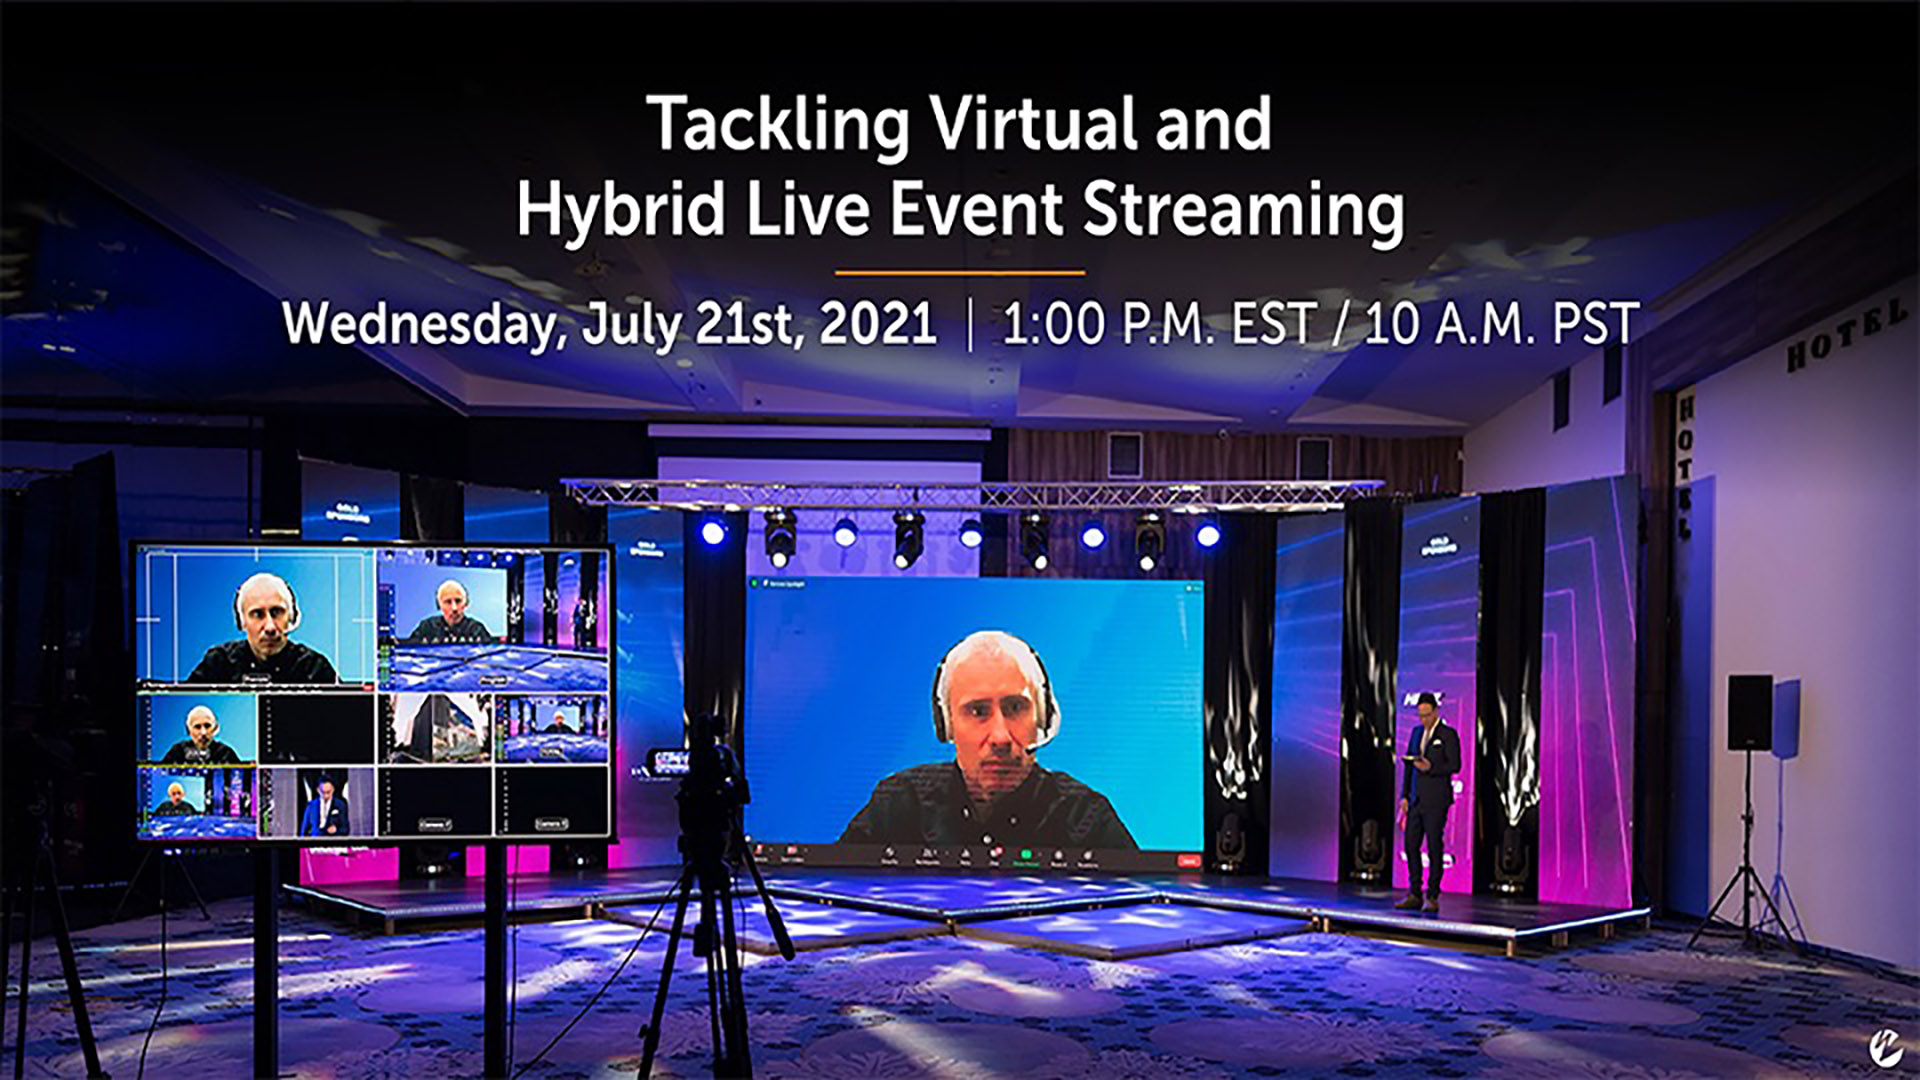 Live streaming, virtual events & hybrid events